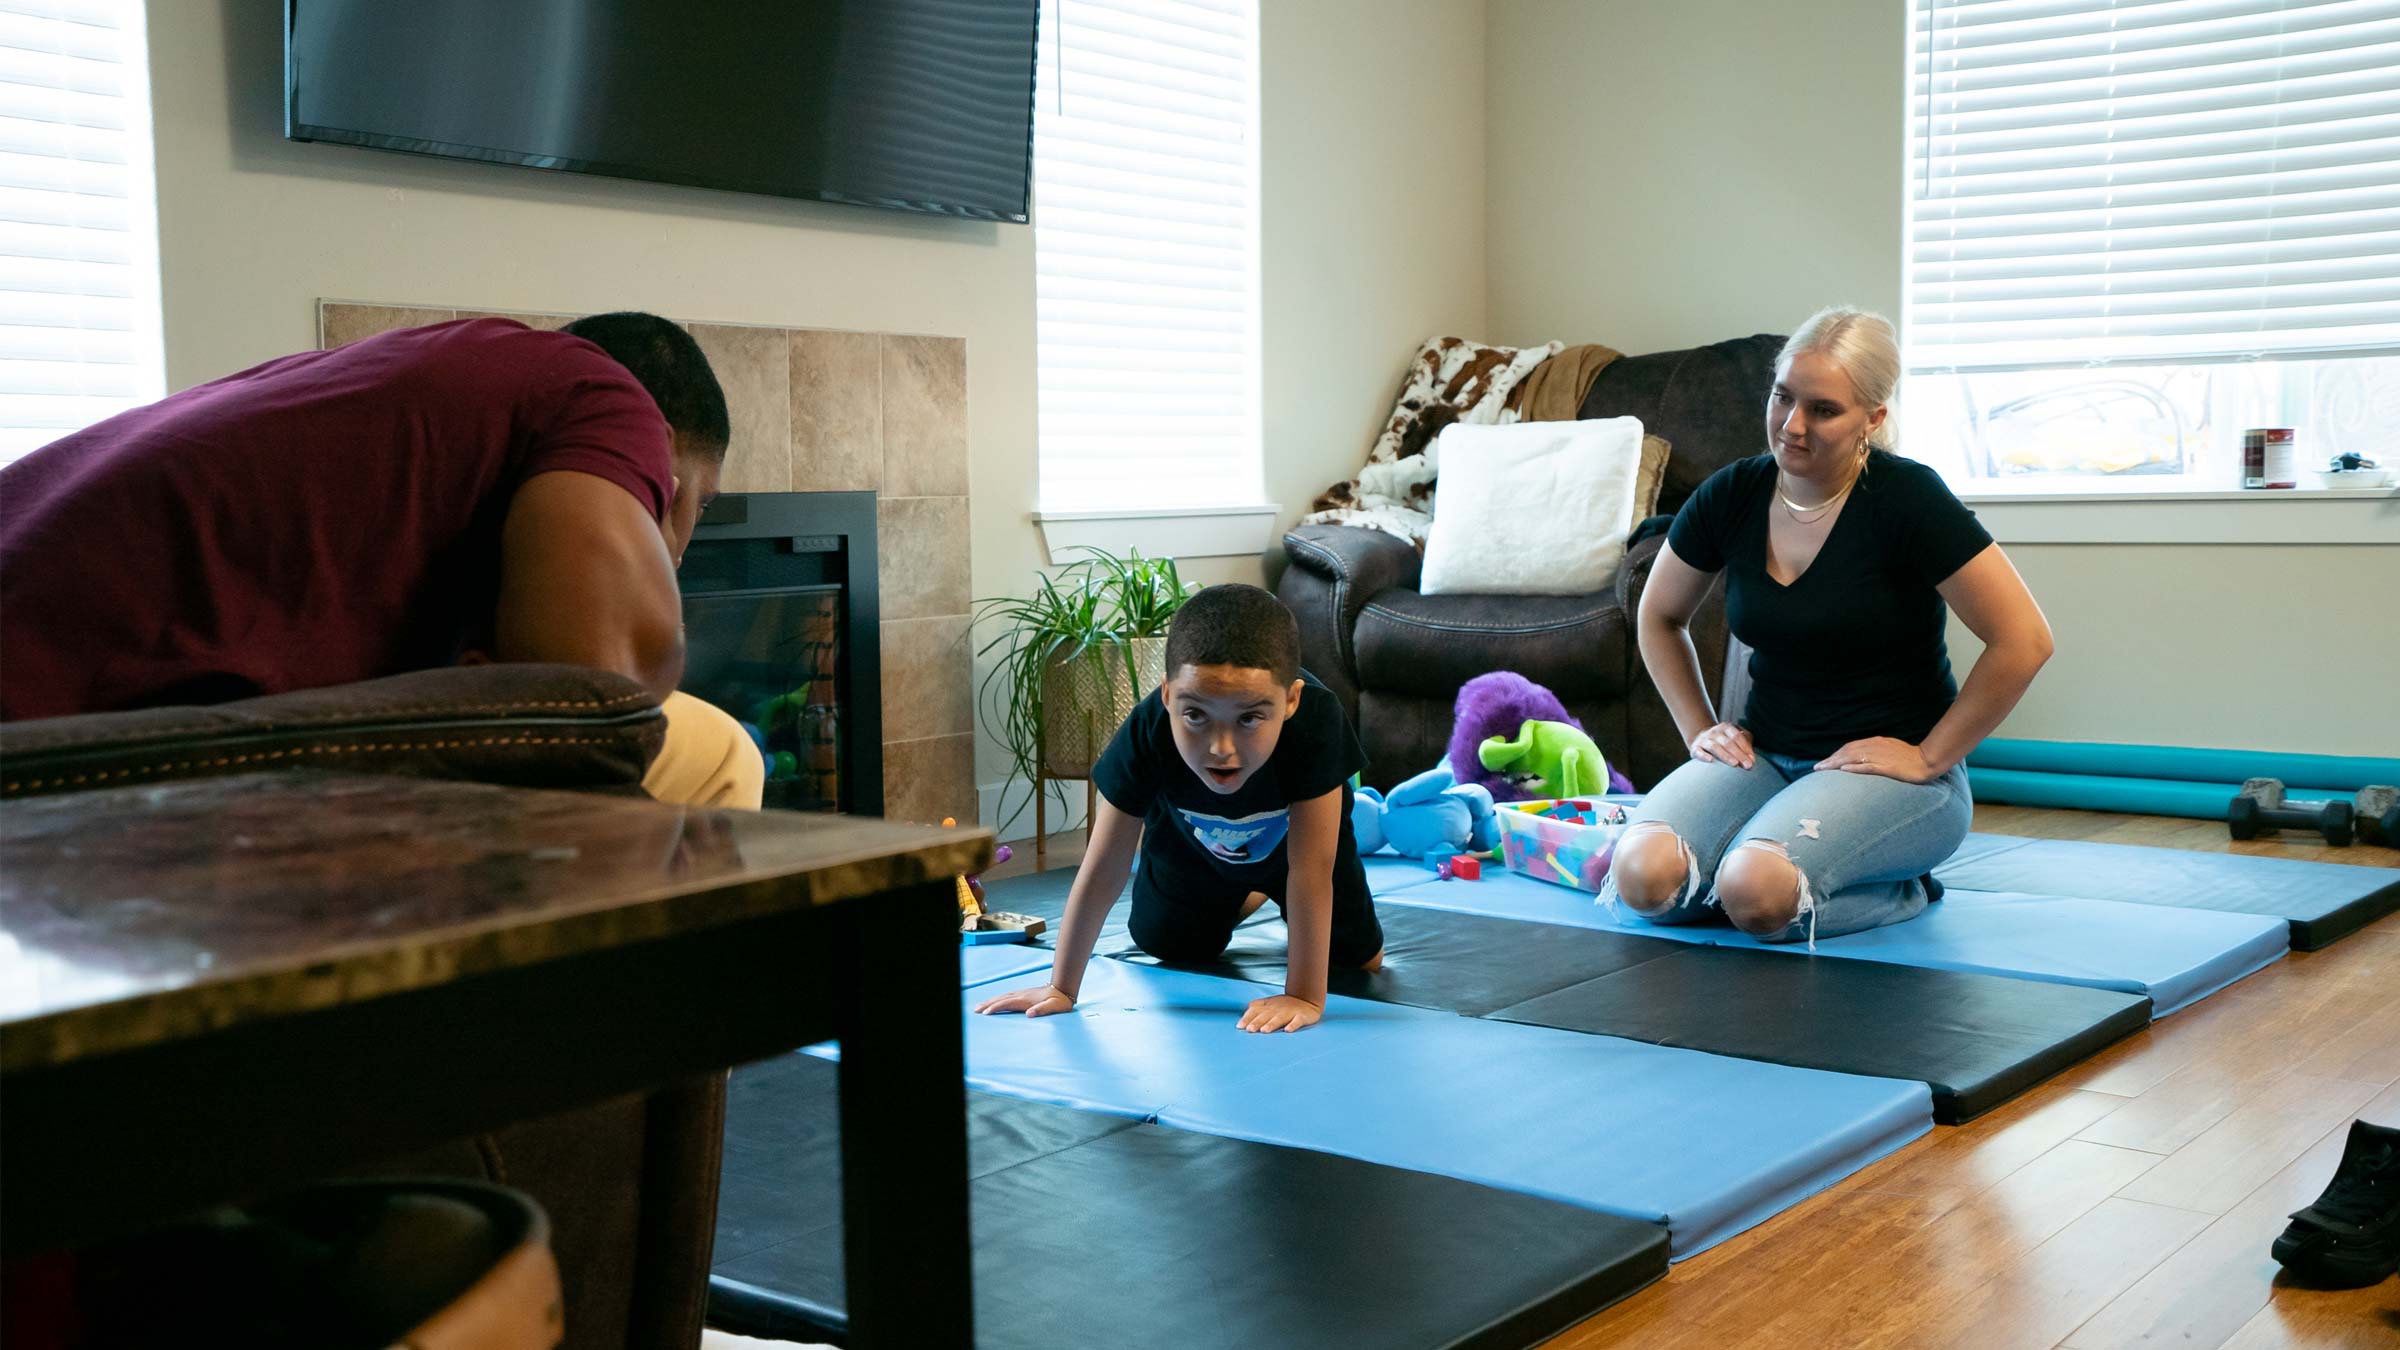 Jamell and Shante Stagg help their son, JuJu, through a regimen of daily physical therapy exercises